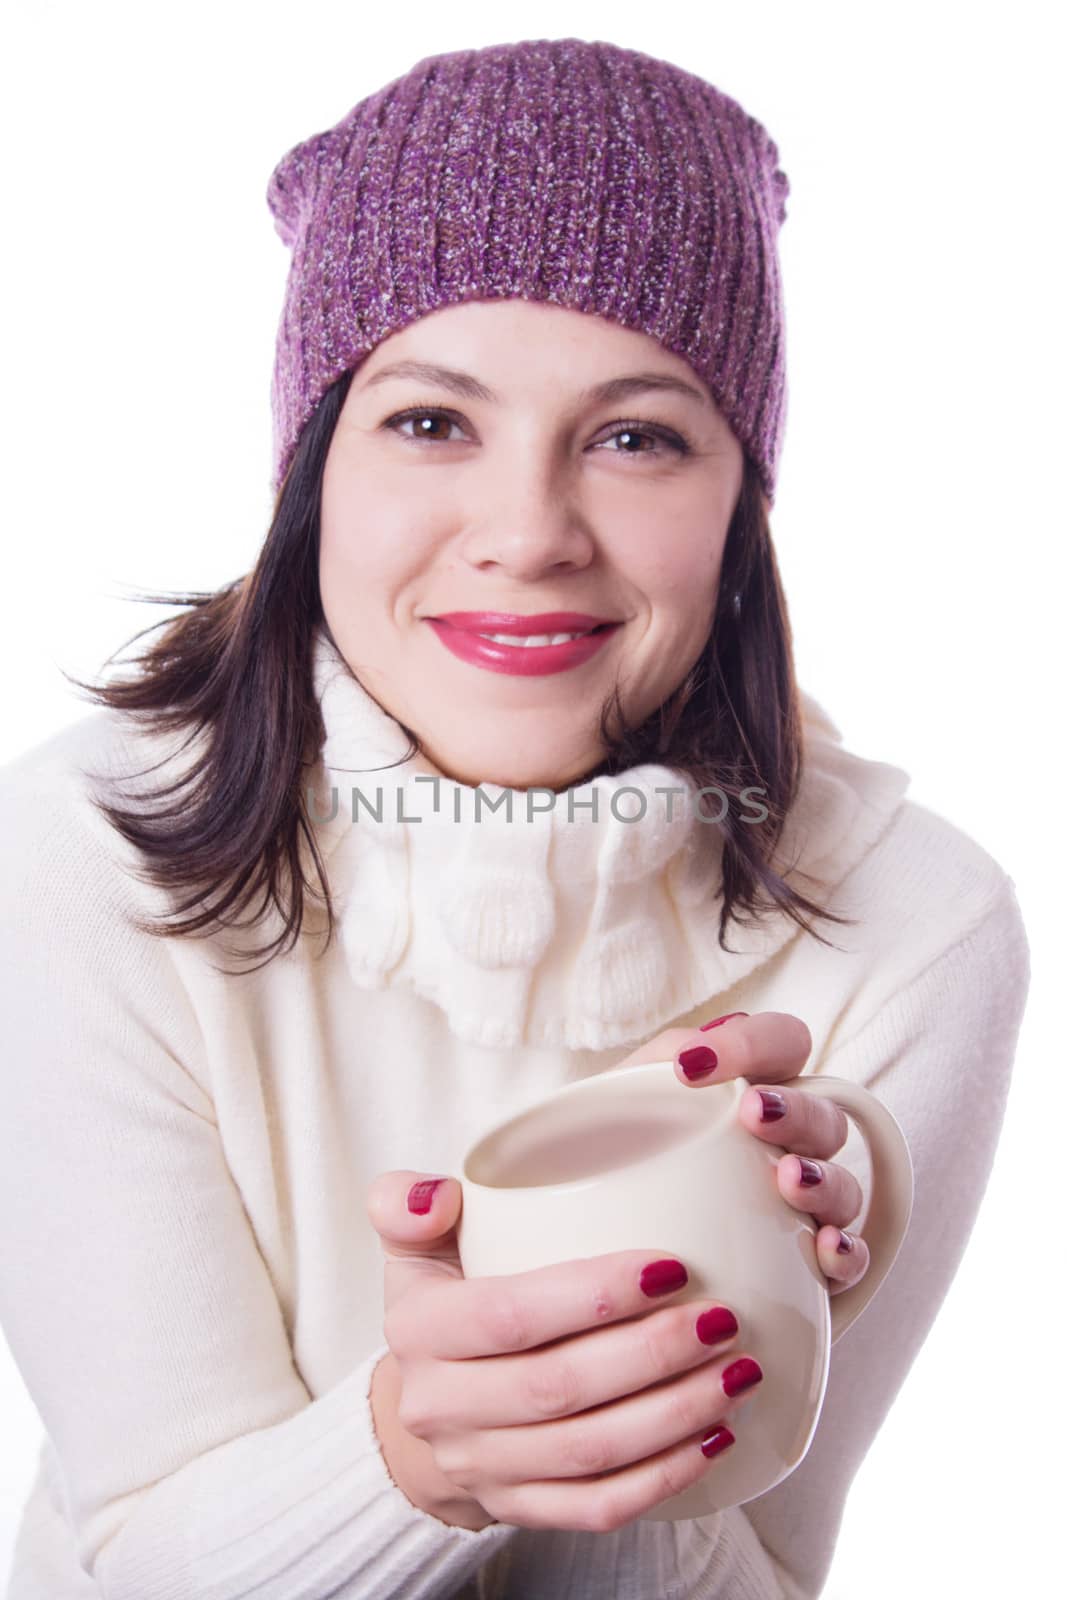 Smiling woman in knitted hat holding cup of beverage over white